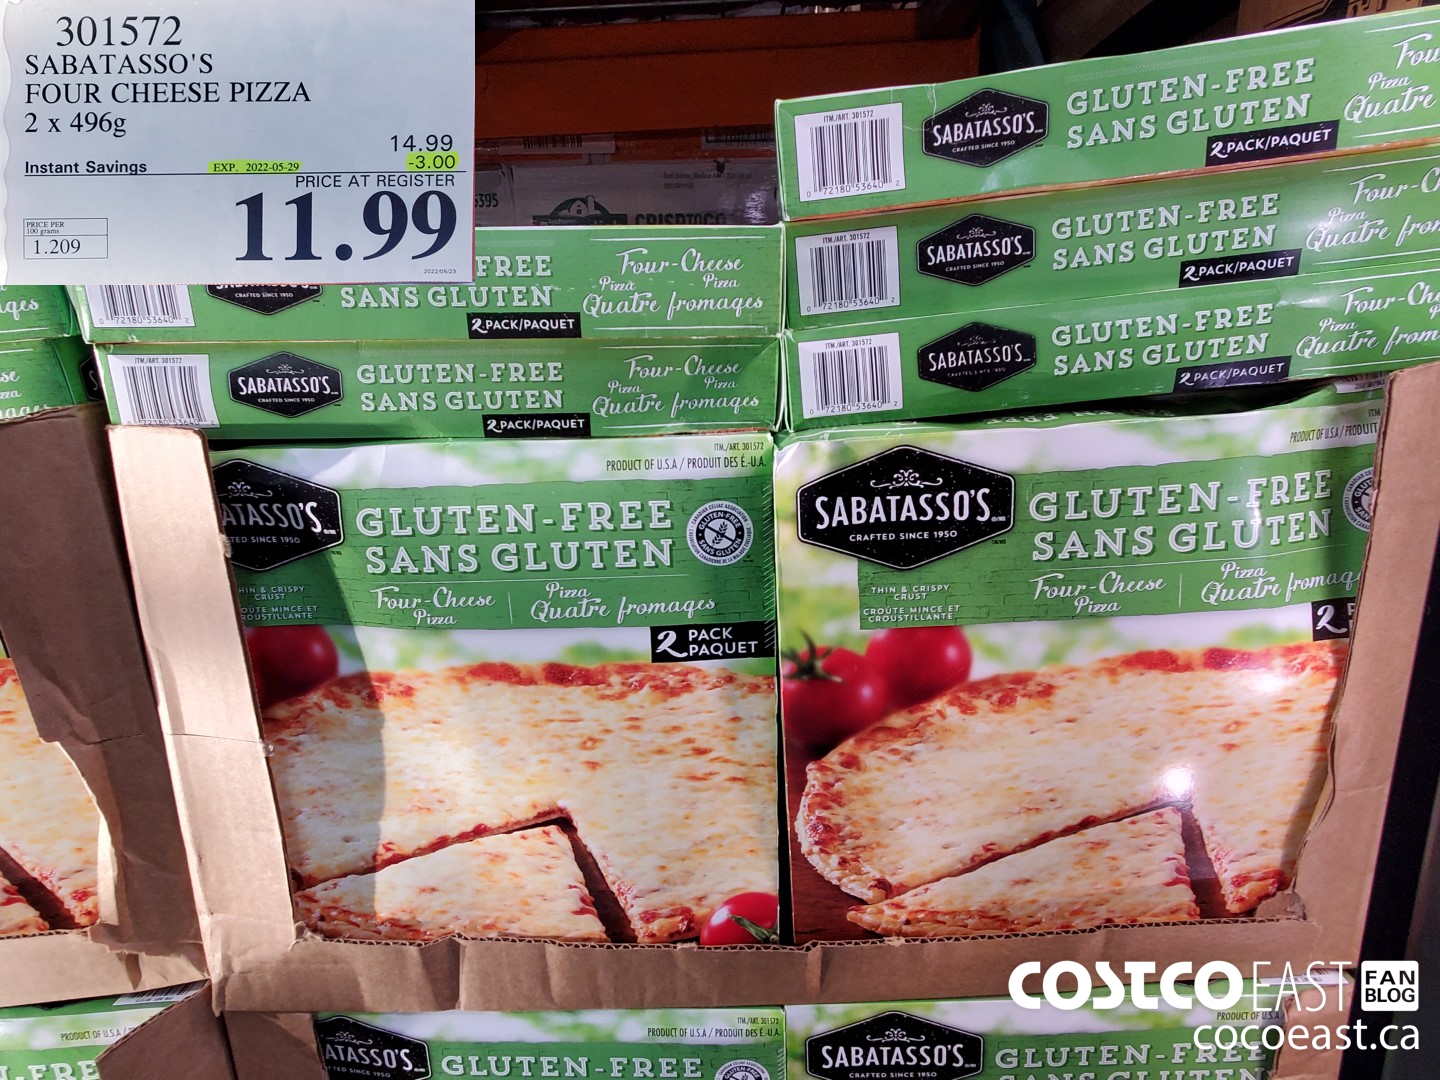 Costco Summer Aisle 2020 Superpost! Clothing, Shoes & Undergarments - Costco  West Fan Blog